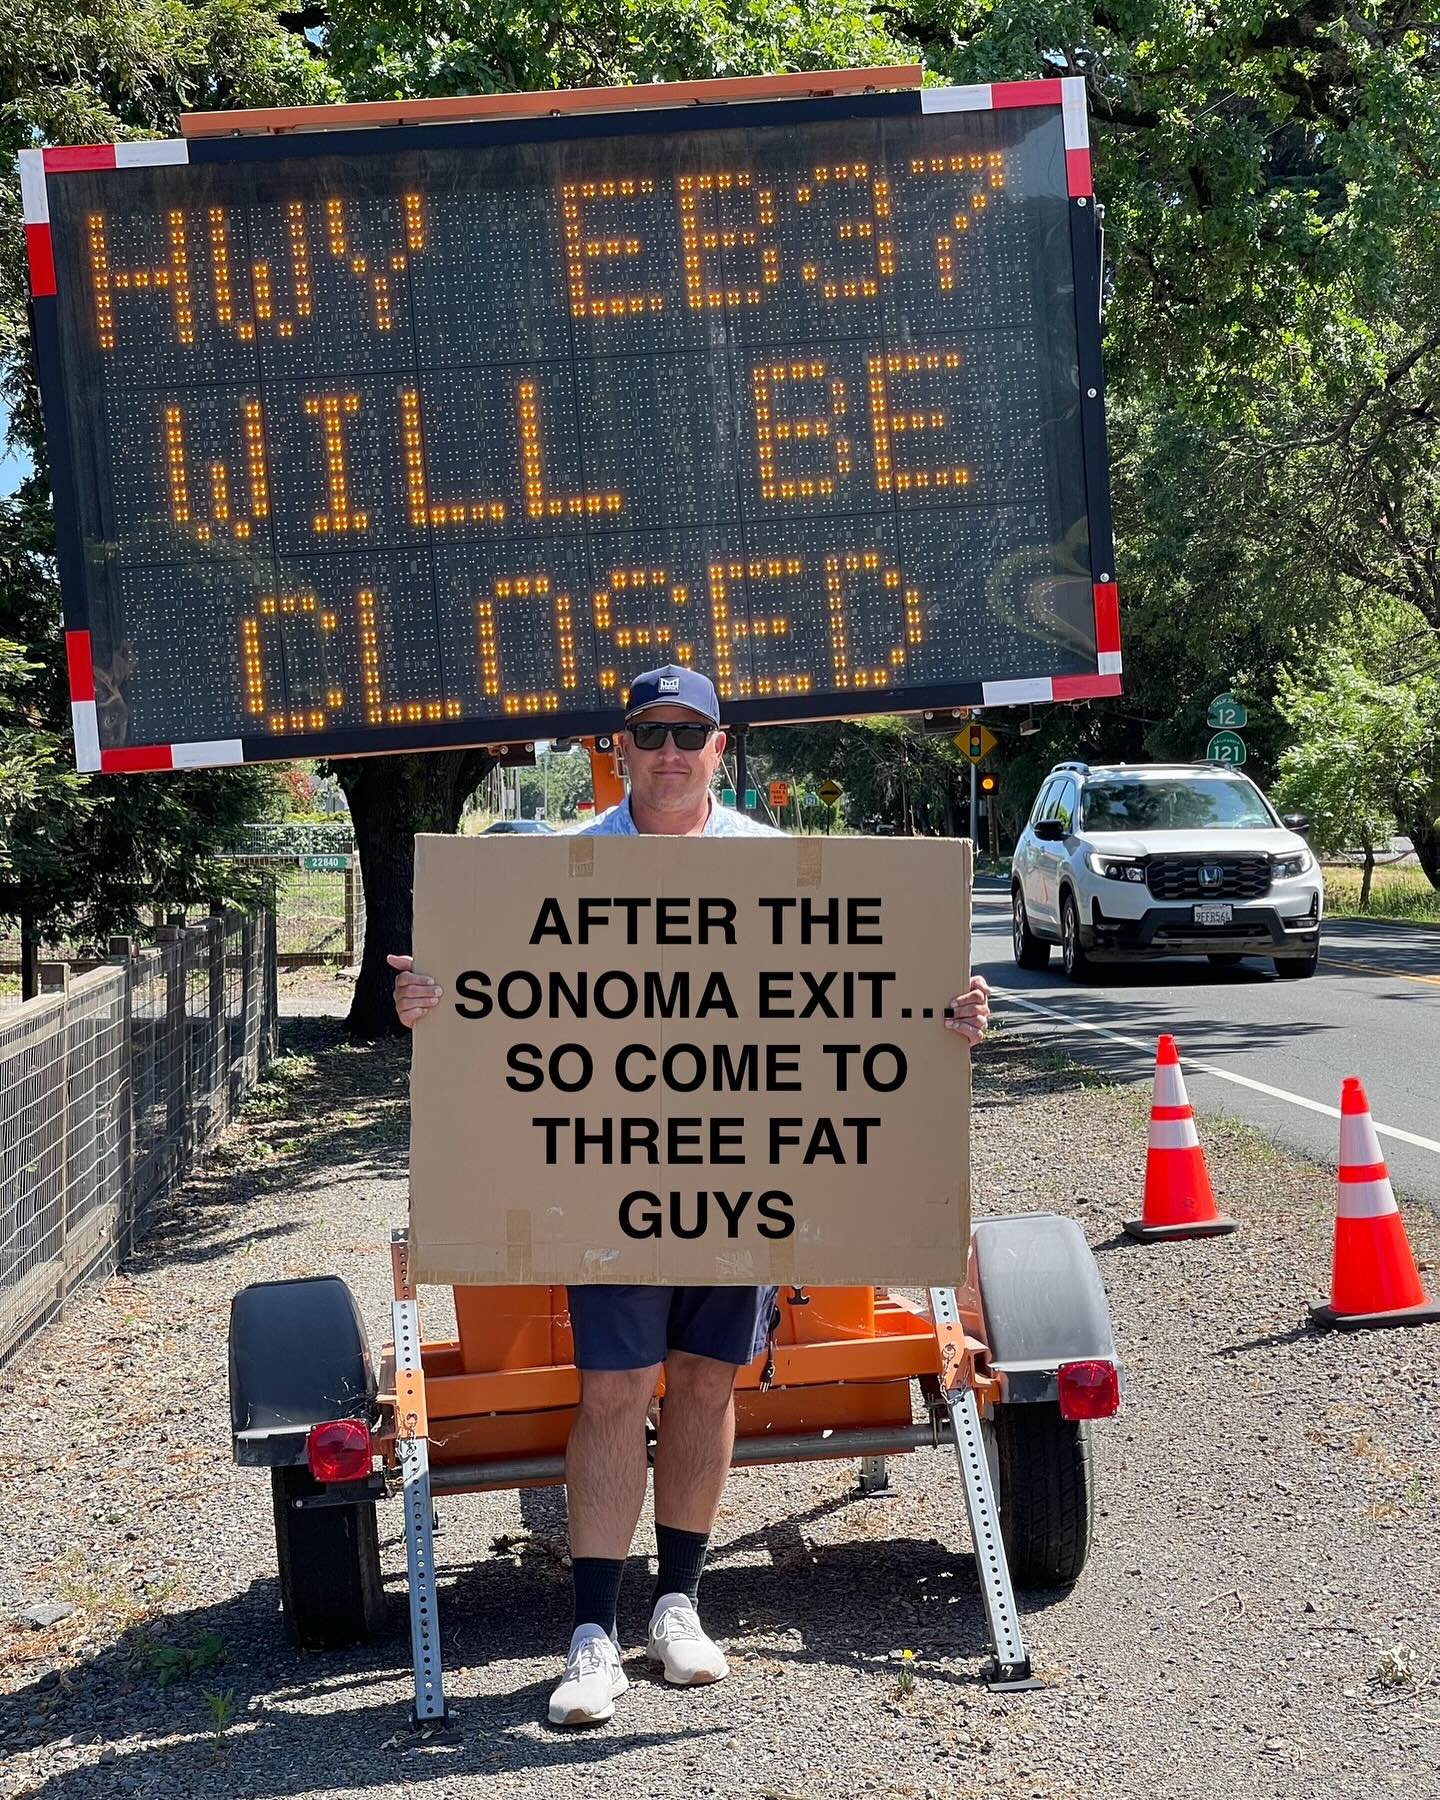 Don&rsquo;t let the road signs fool you, you can STILL get to Sonoma and Three Fat Guys even though parts of 37 are closed! 
.
#threefatguyswines #sonoma #winecountry #winetasting #winenot #winetastings #sonomavalleywine #dudewithsign #dudewithasign 